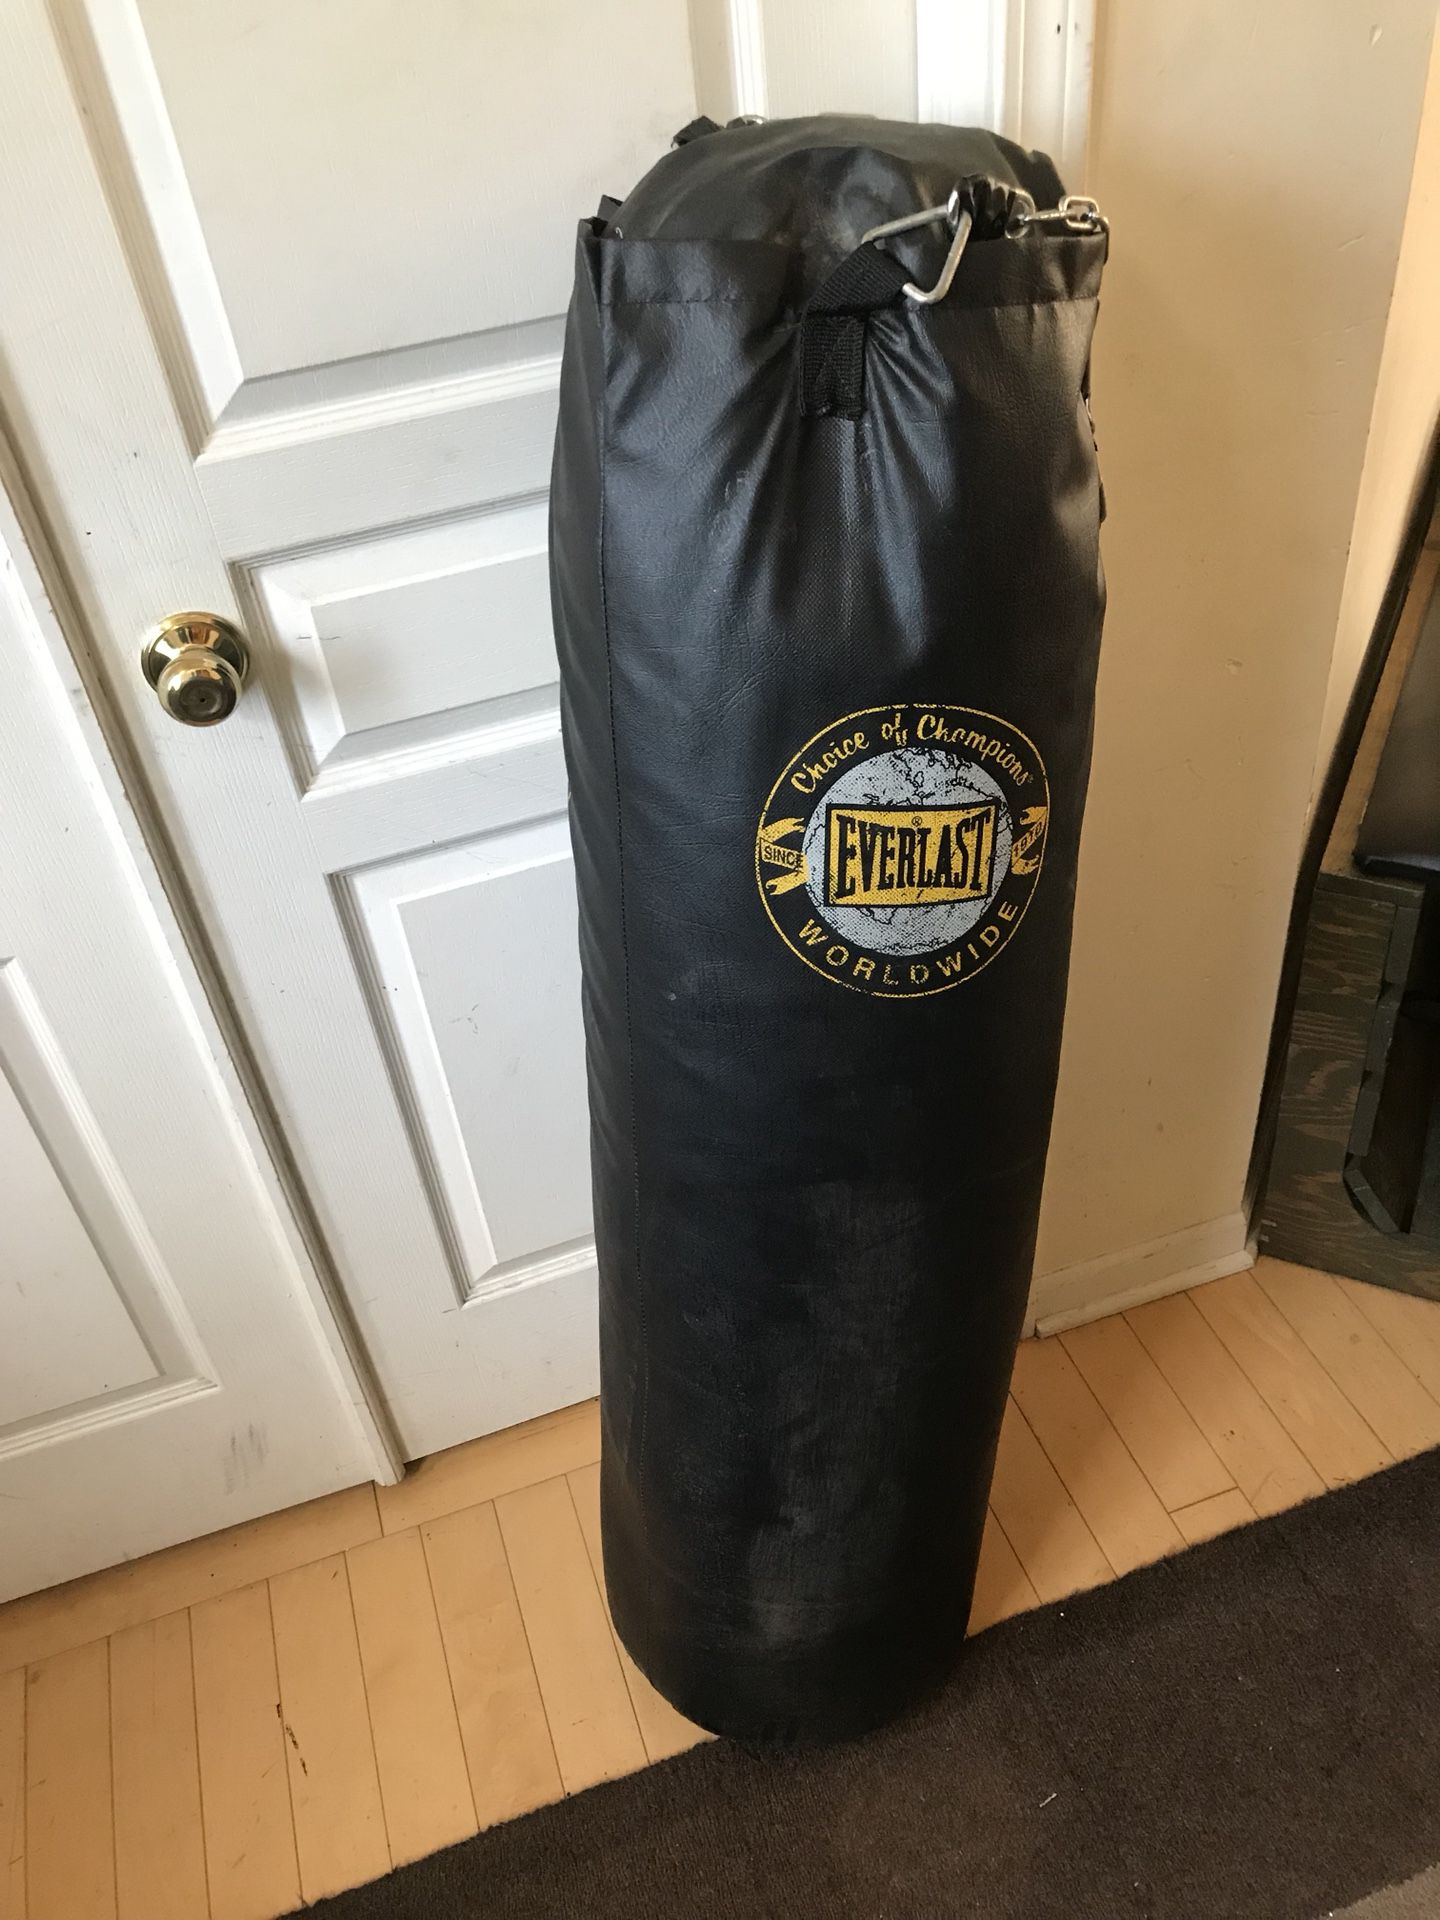 Noordoosten Pef marionet 100lbs Everlast Choice Of Champions Punching Bag for Sale in Romeoville, IL  - OfferUp